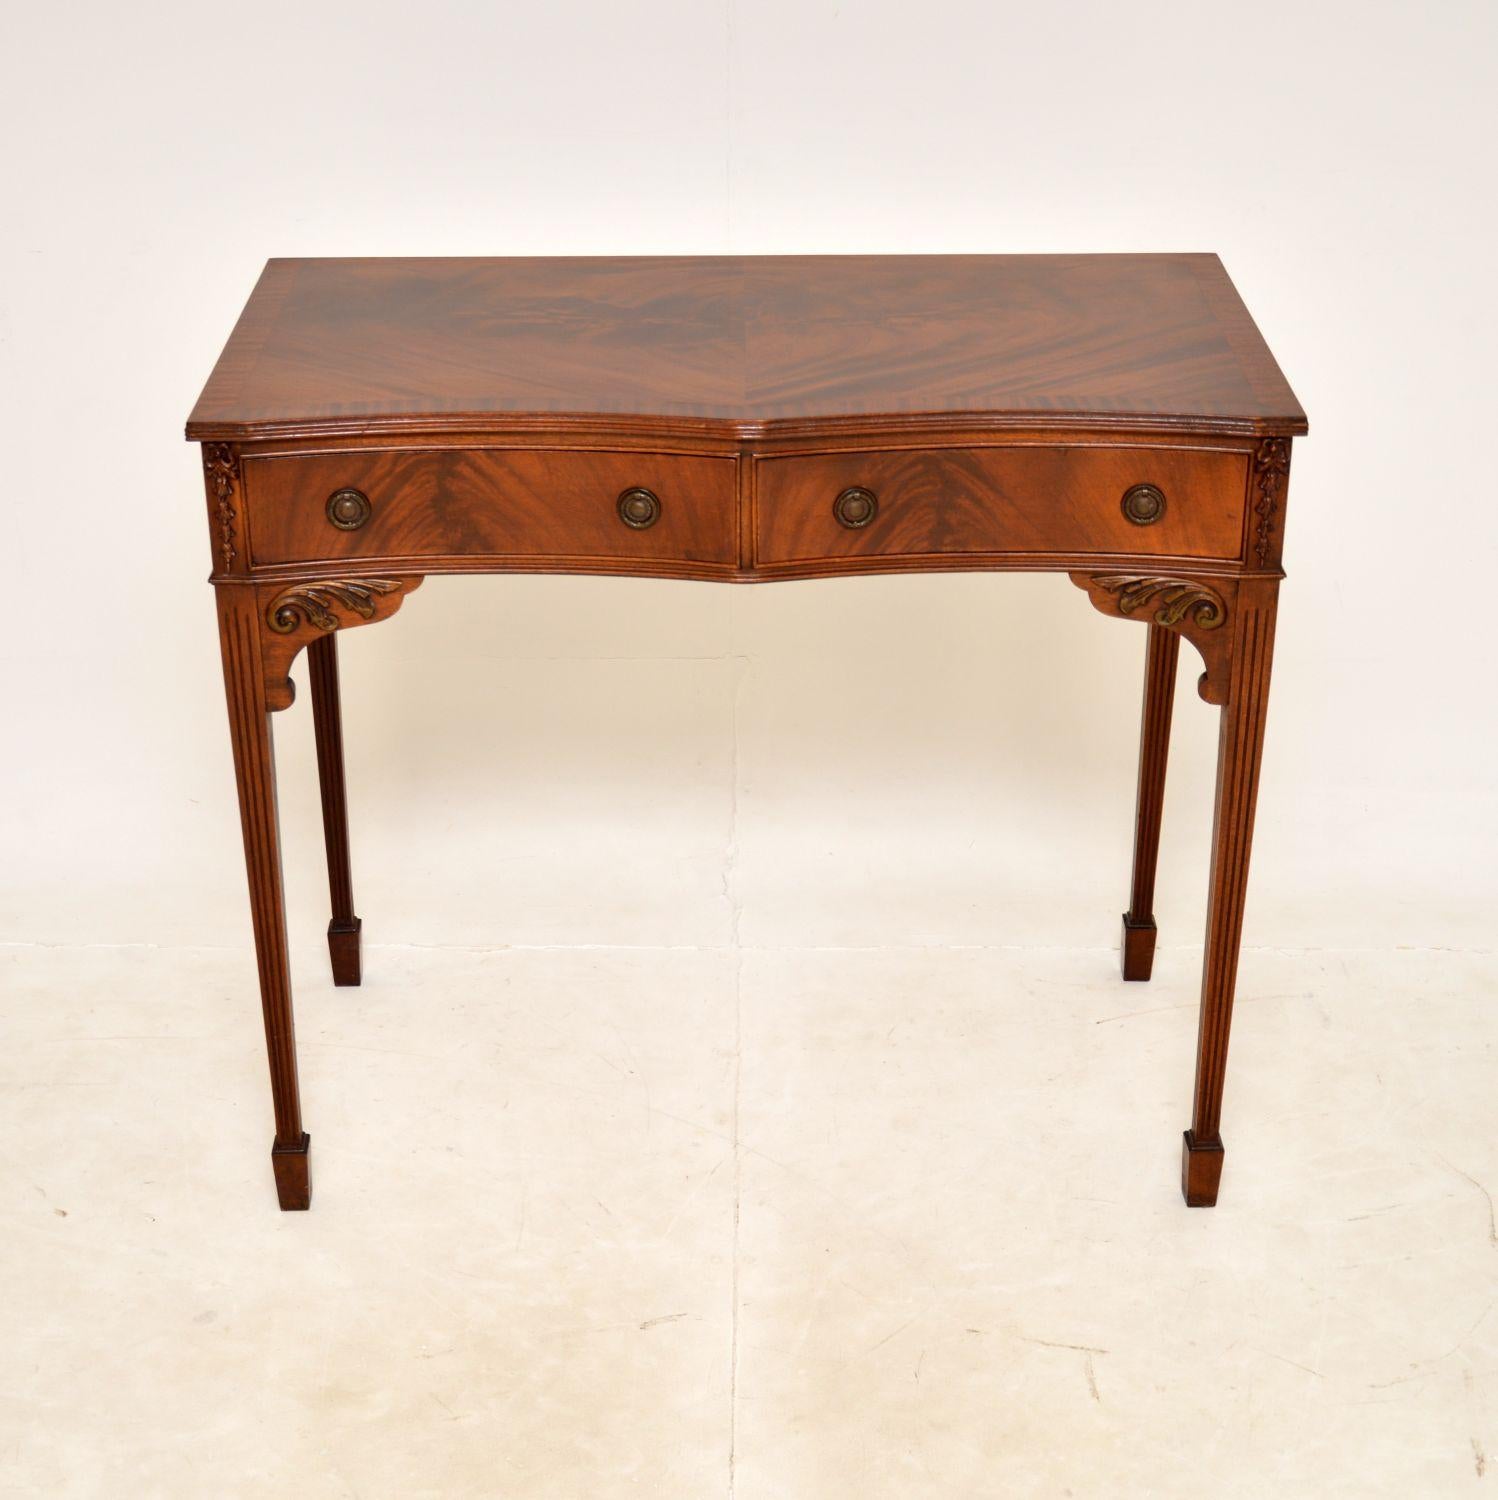 A smart and very useful antique console / server table. This was made in England, it dates from around the 1930’s.

The quality is excellent, this has beautiful flamed grain patterns and fine carving on the edges. This has a cross banded top, it